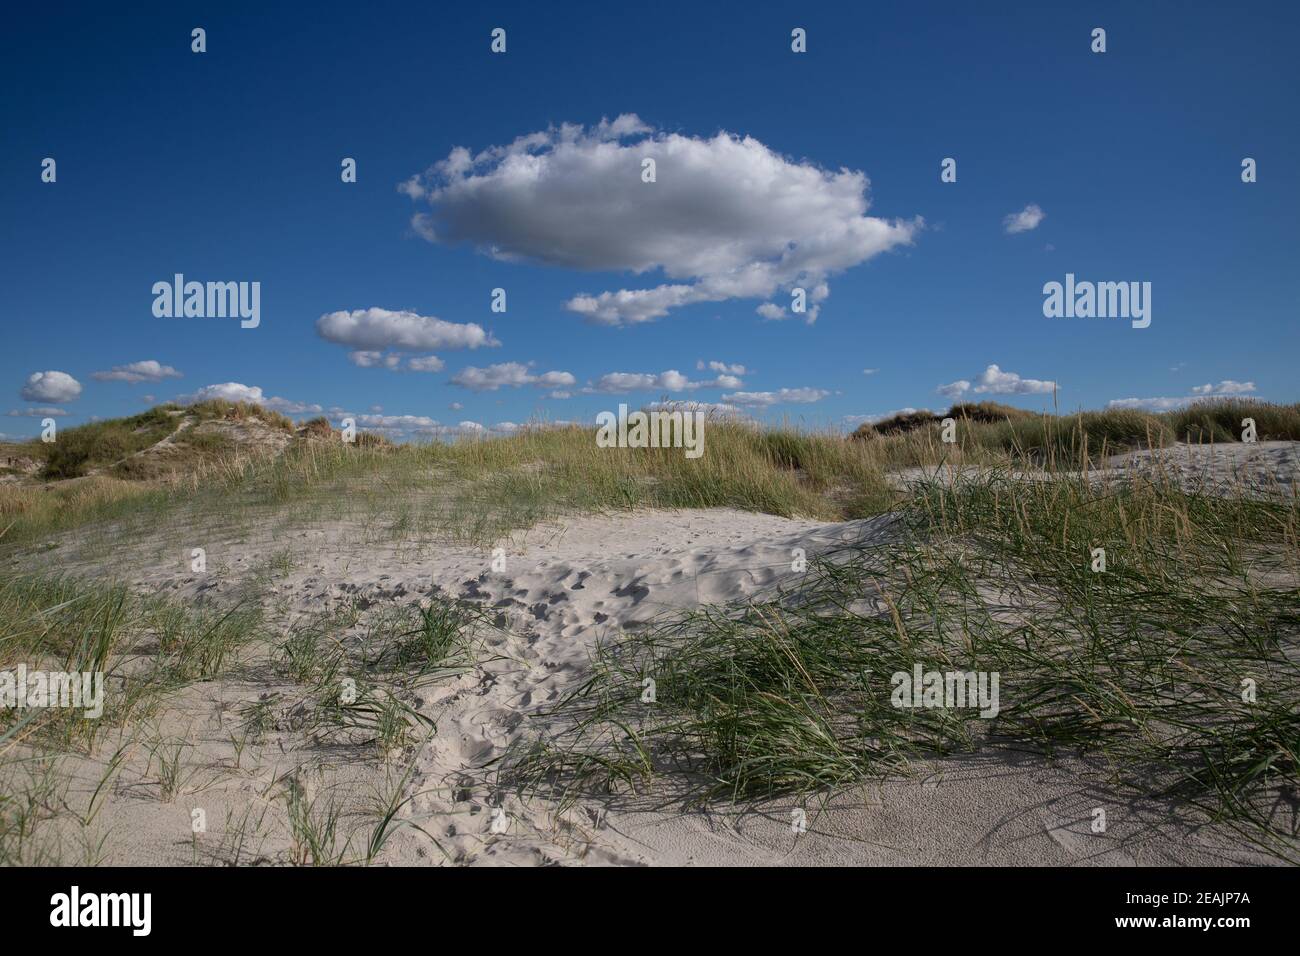 Clouds over the dunes near St. Peter Ording Stock Photo